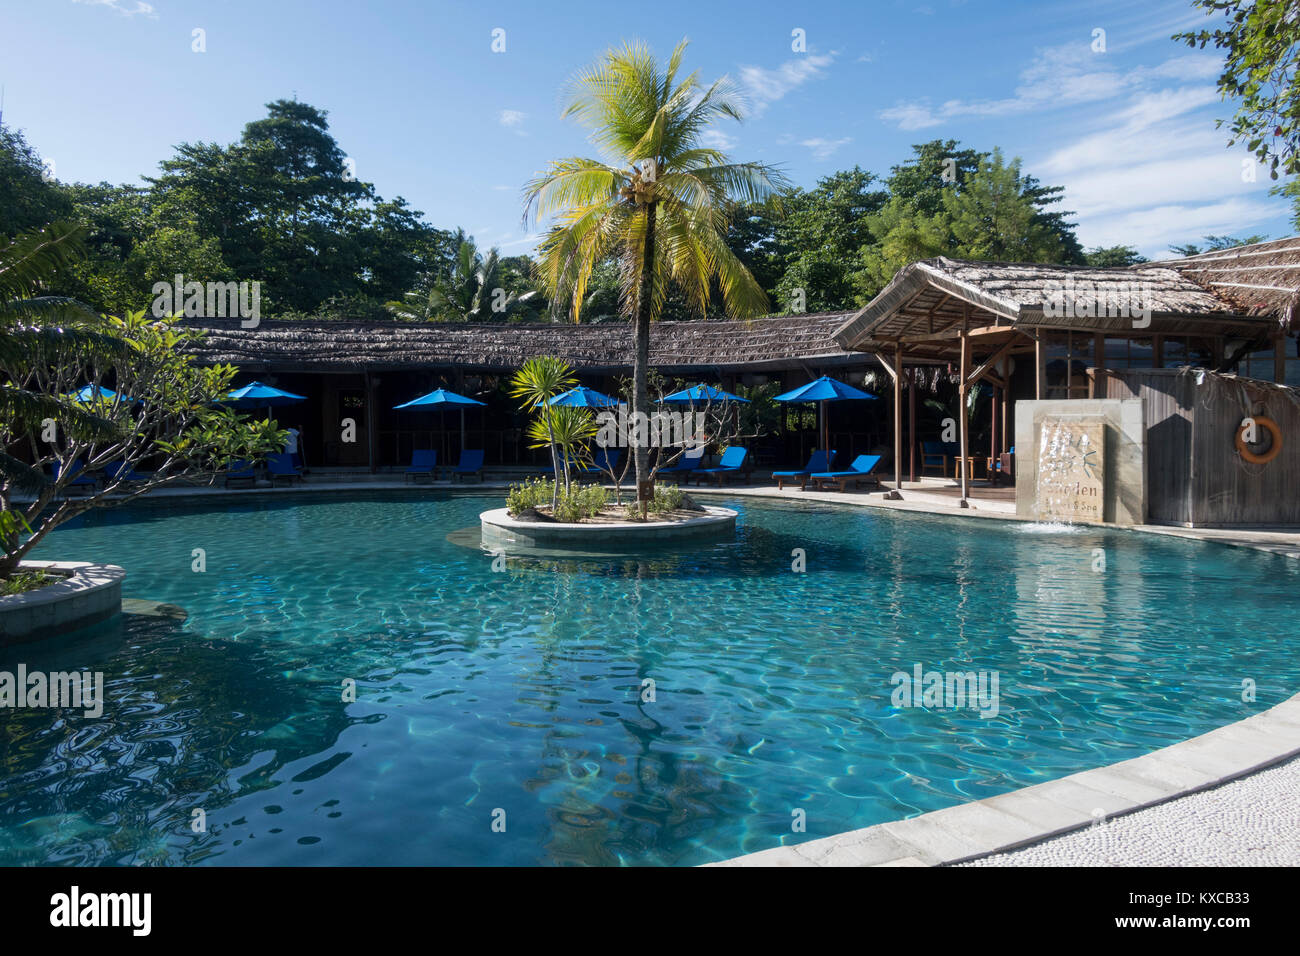 Swimming pool at the Siladen resort and spa, North Sulawesi, Indonesia Stock Photo